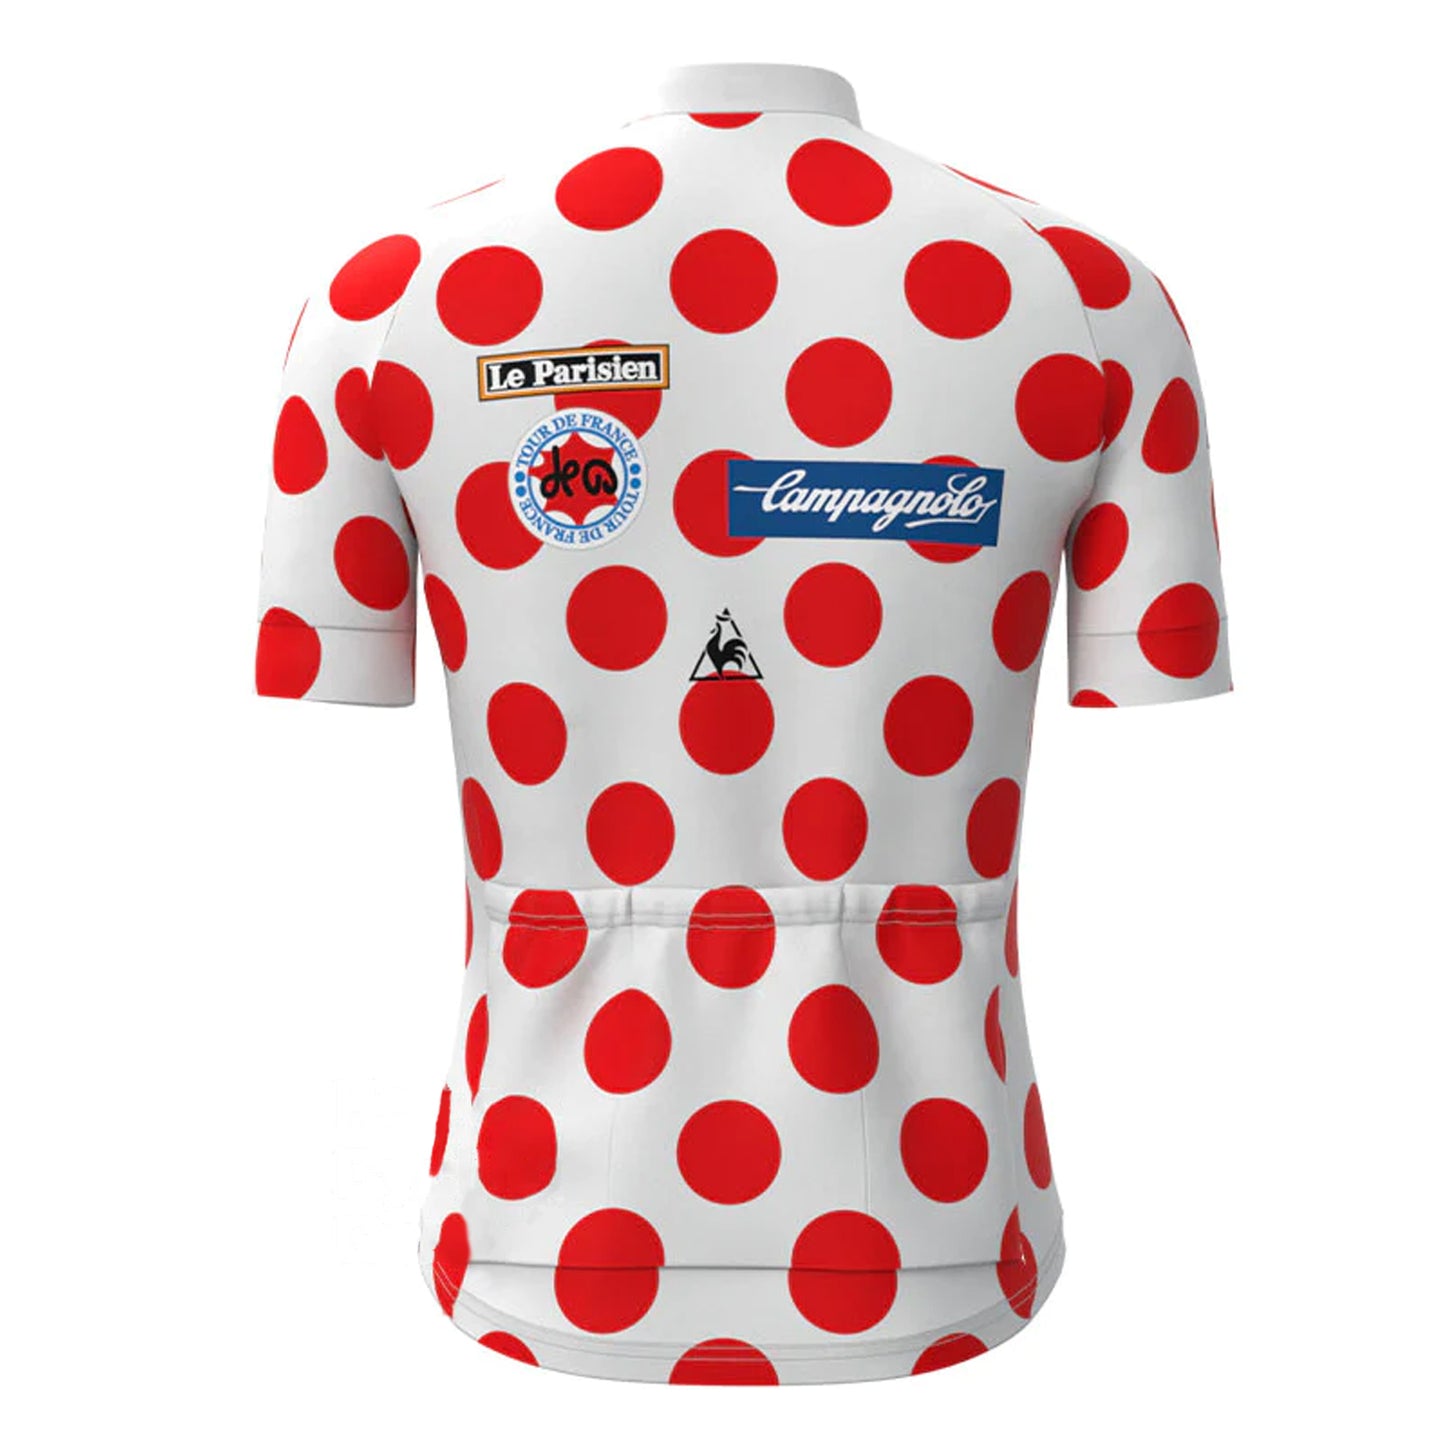 Le Parisien Red Vintage Short Sleeve Cycling Jersey Top